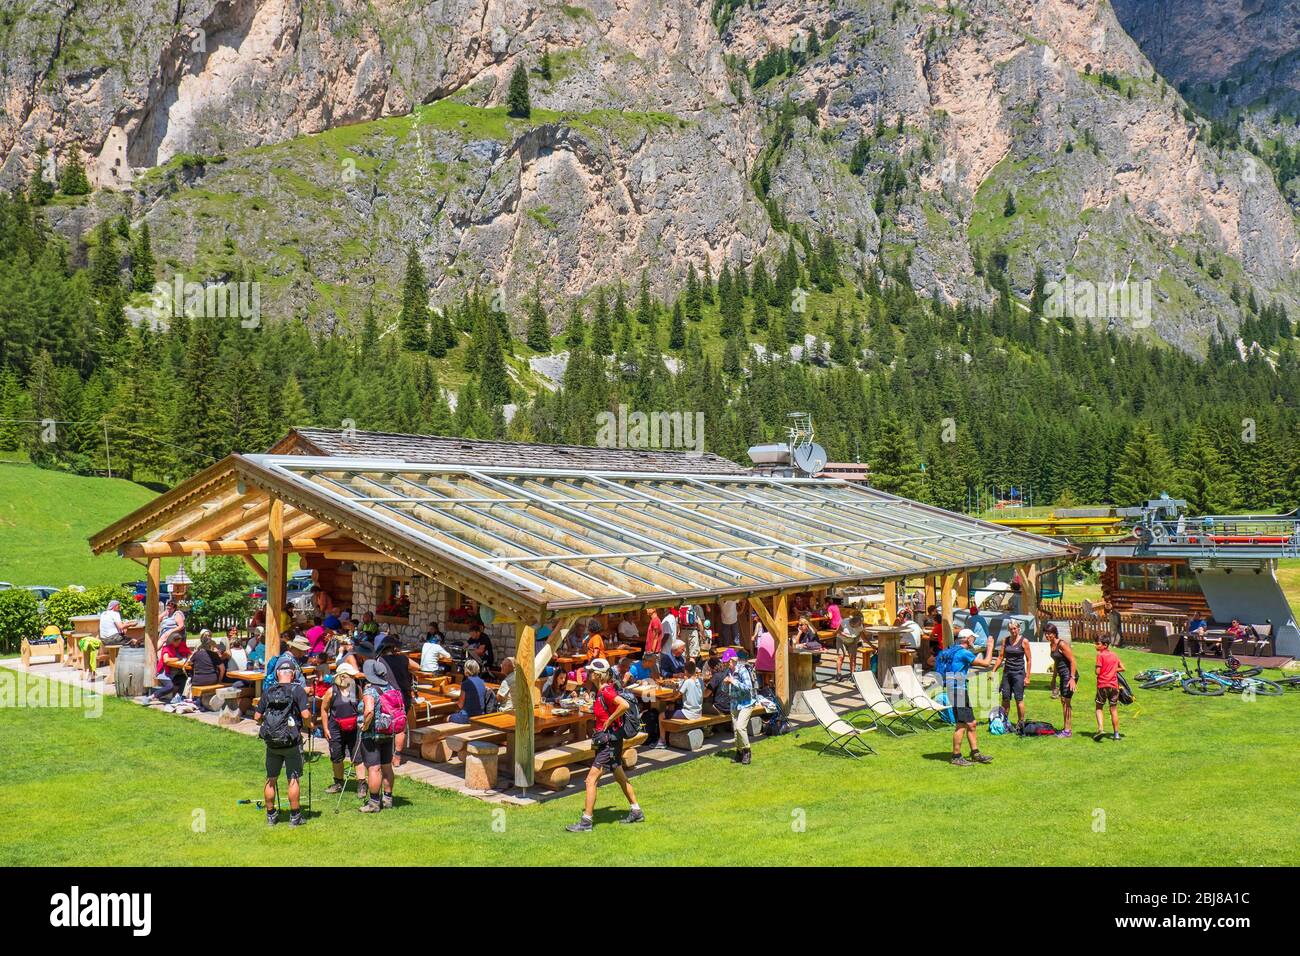 Restaurant with lots of people in an alp valley Stock Photo